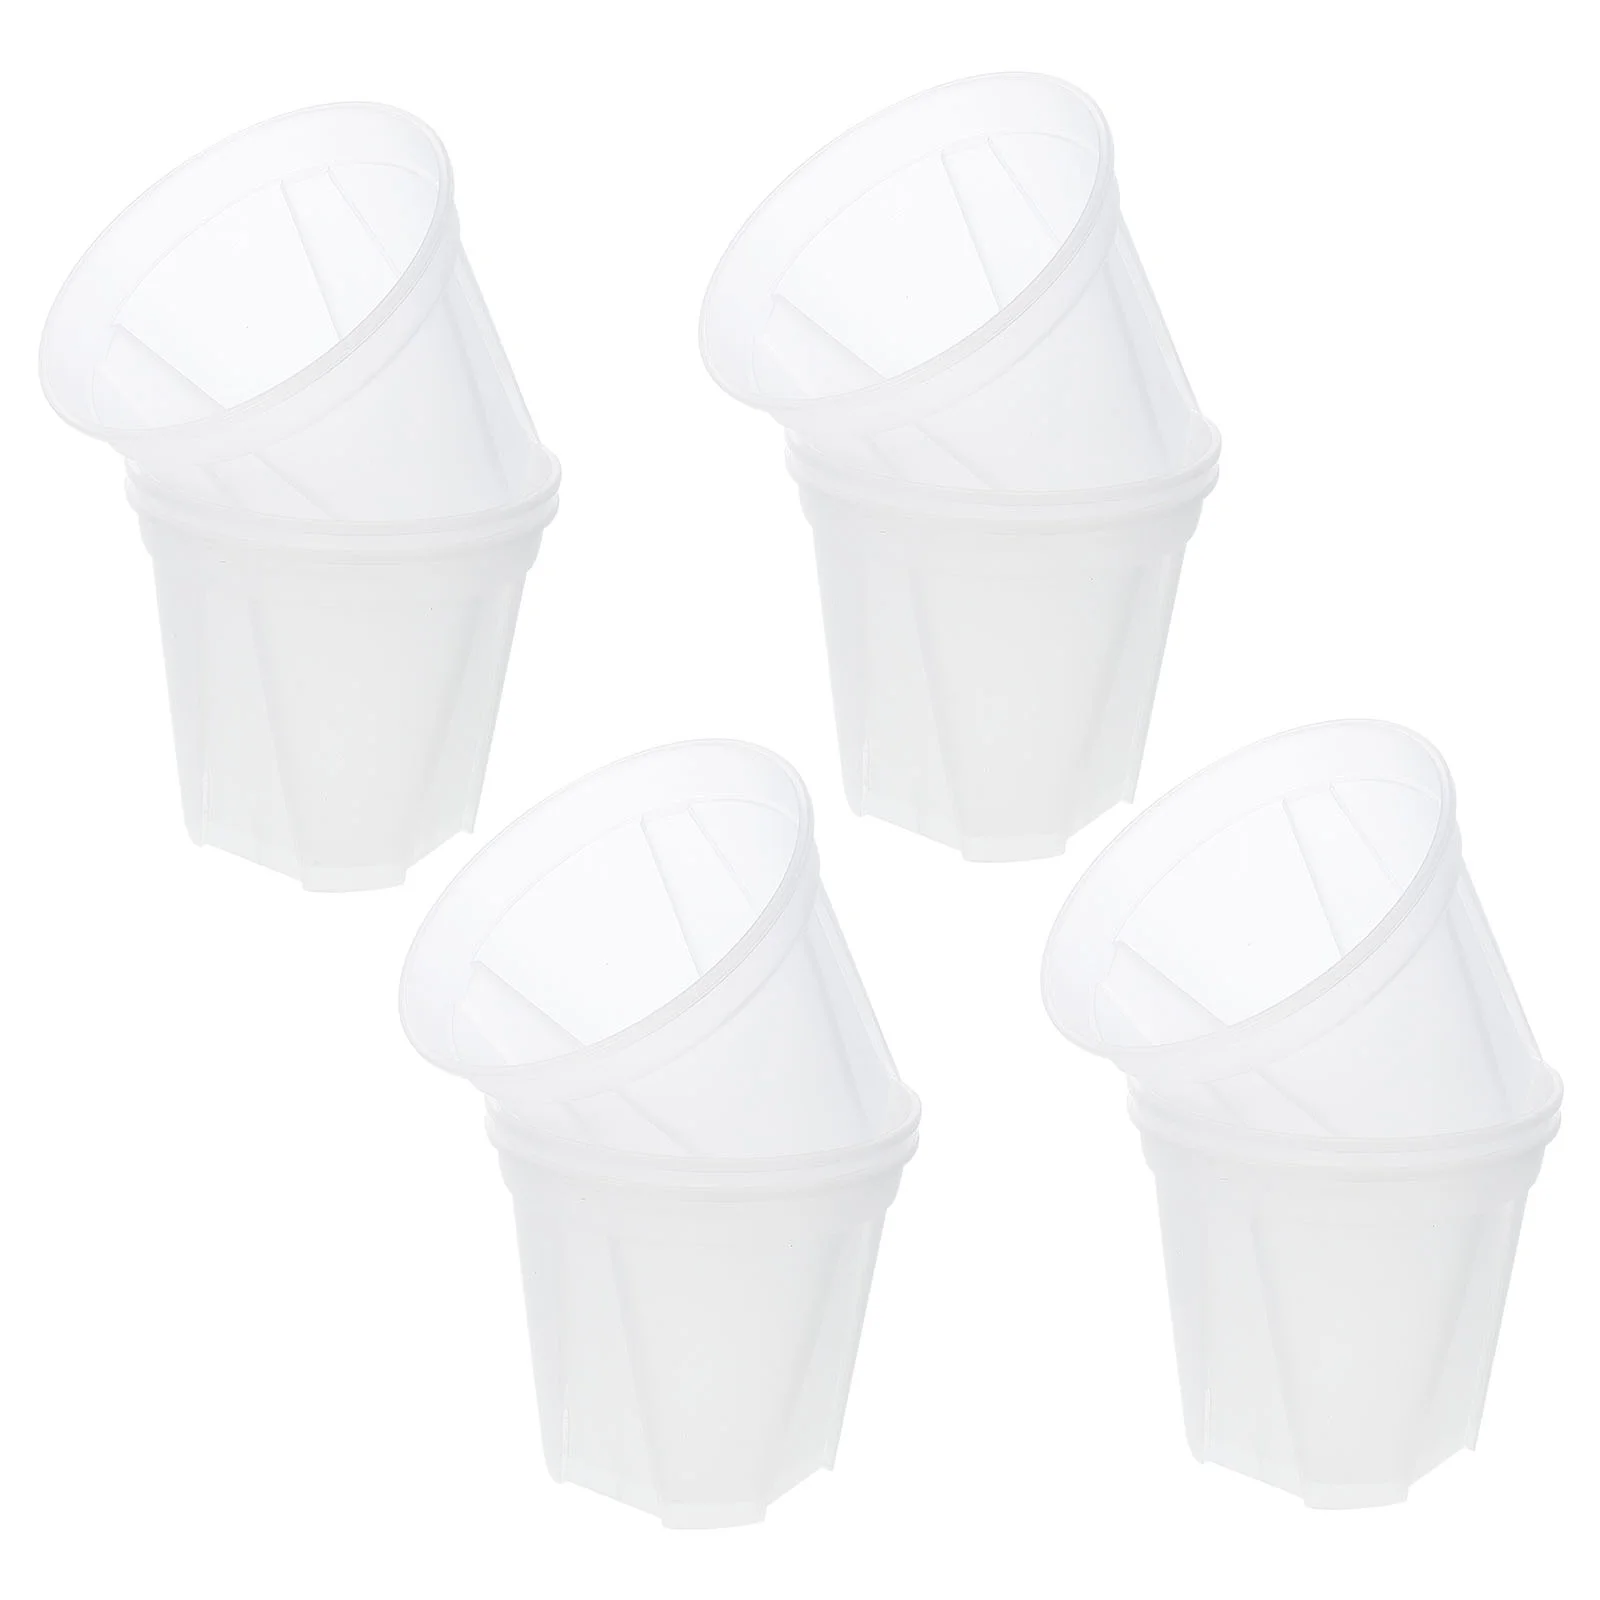 

10 Pcs Plastic Outdoor Planters Basin Control Root Flowerpots Gardening Planting Container Tool Pp Plants Orchid